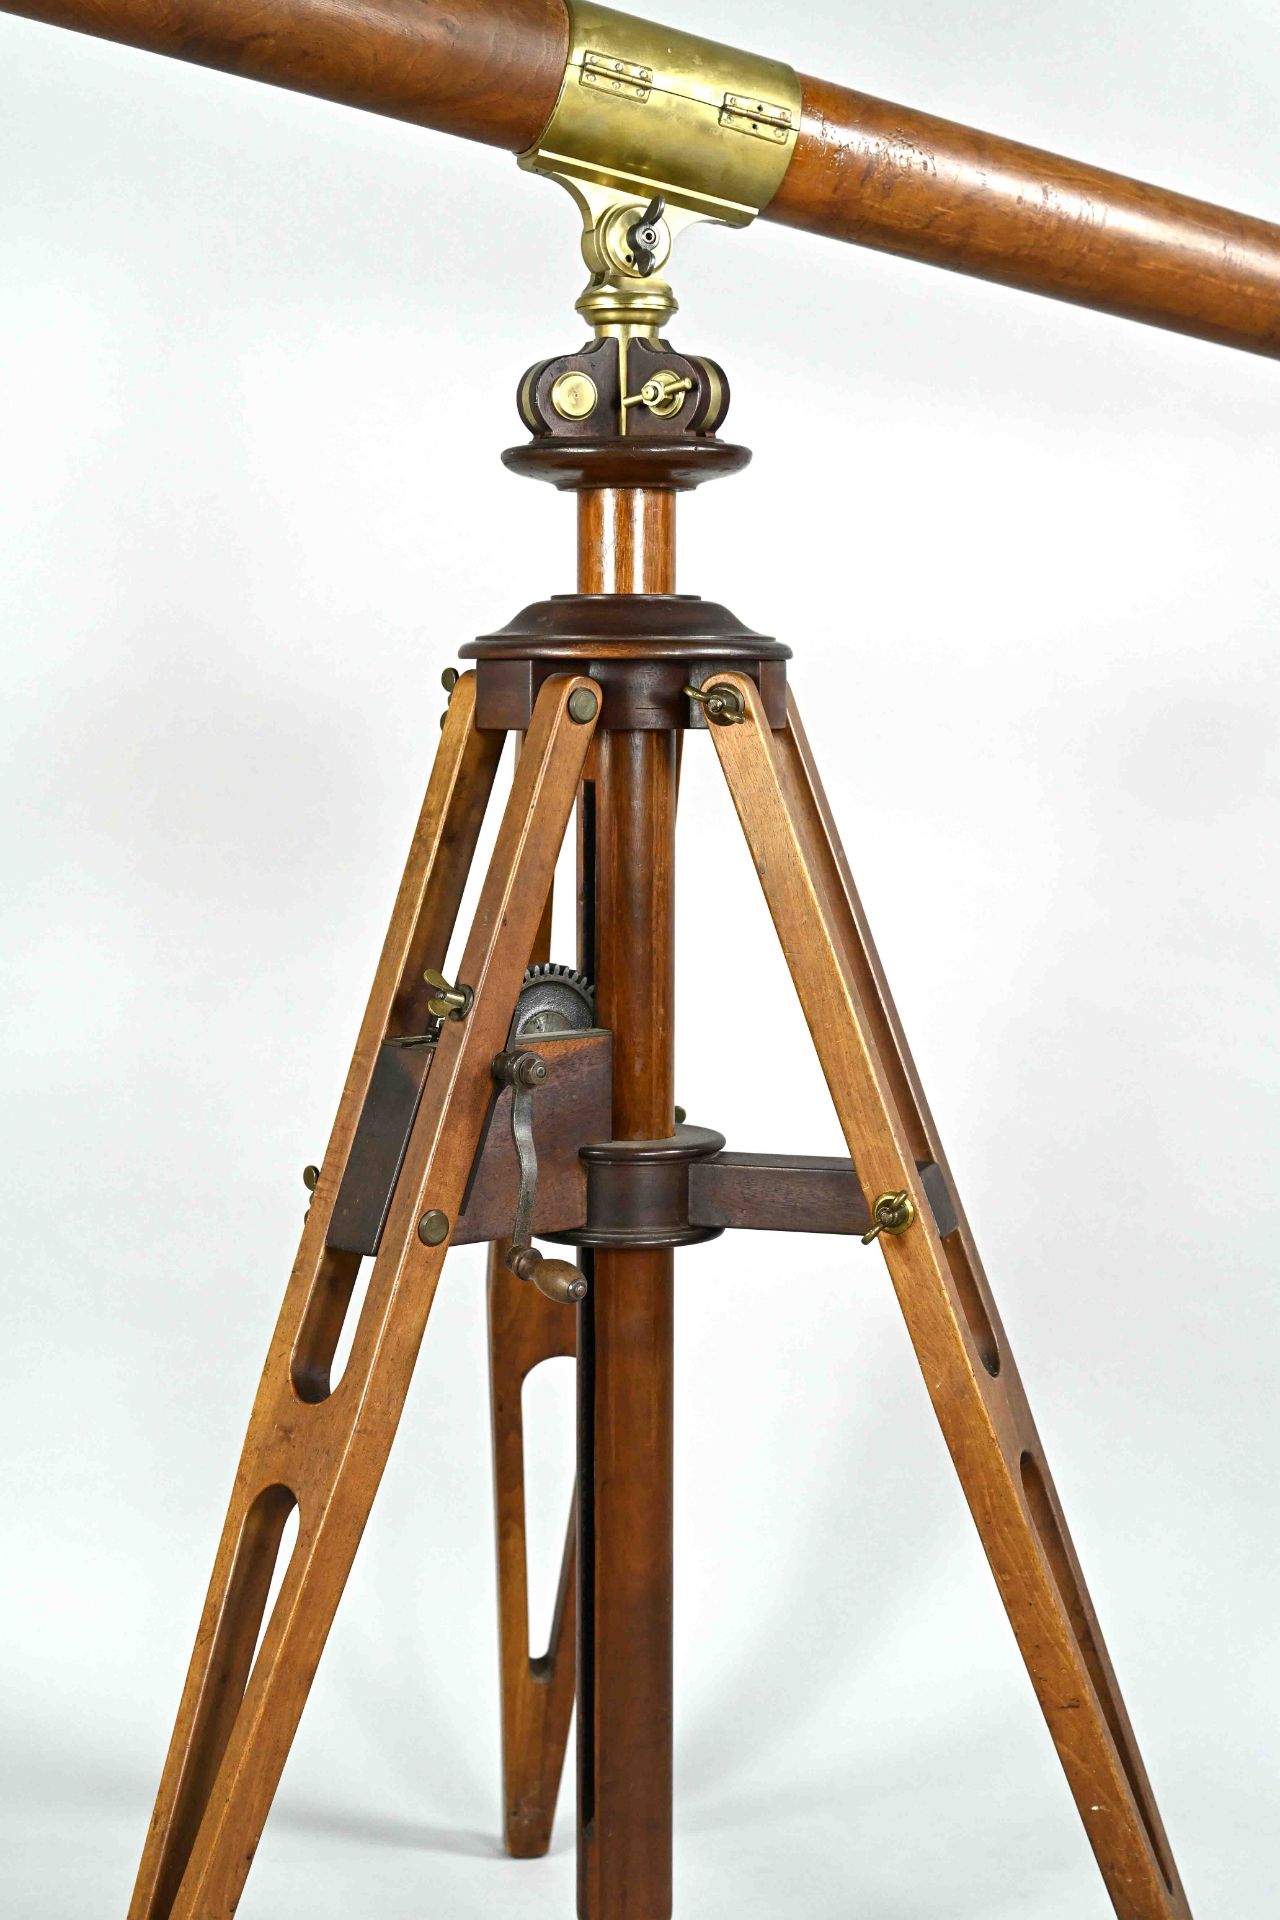 Large telescope on tripod, Germany, mid-19th century, Woerle & brothers von Ruedorffer, walnut and  - Image 2 of 5